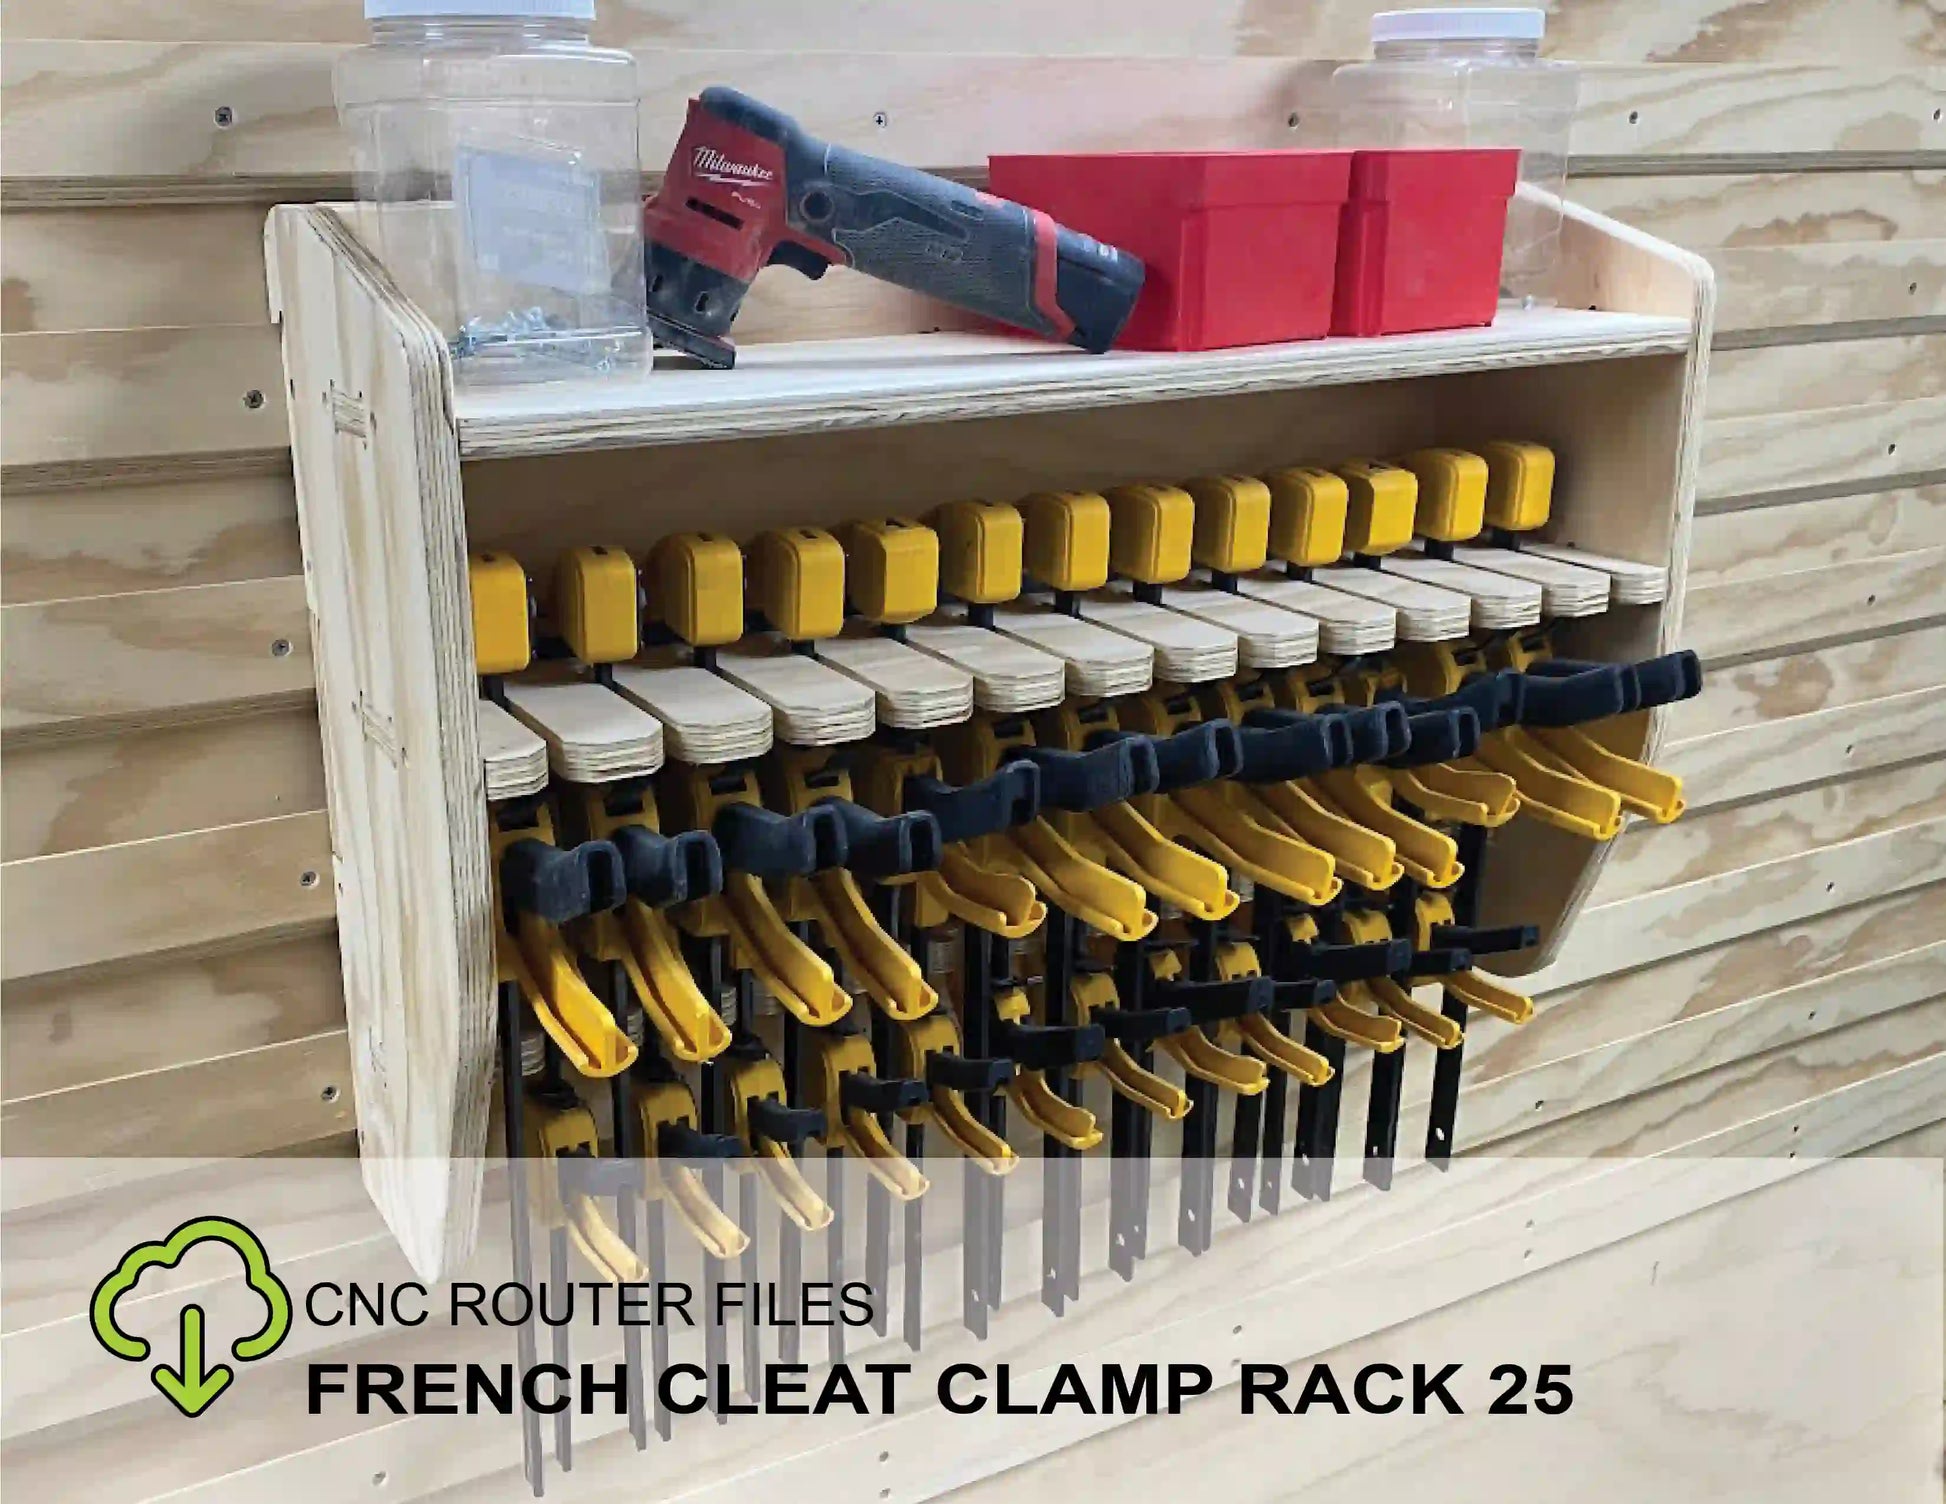 CNC Router Files French Cleat Sandpaper Holder Rack CNC Router